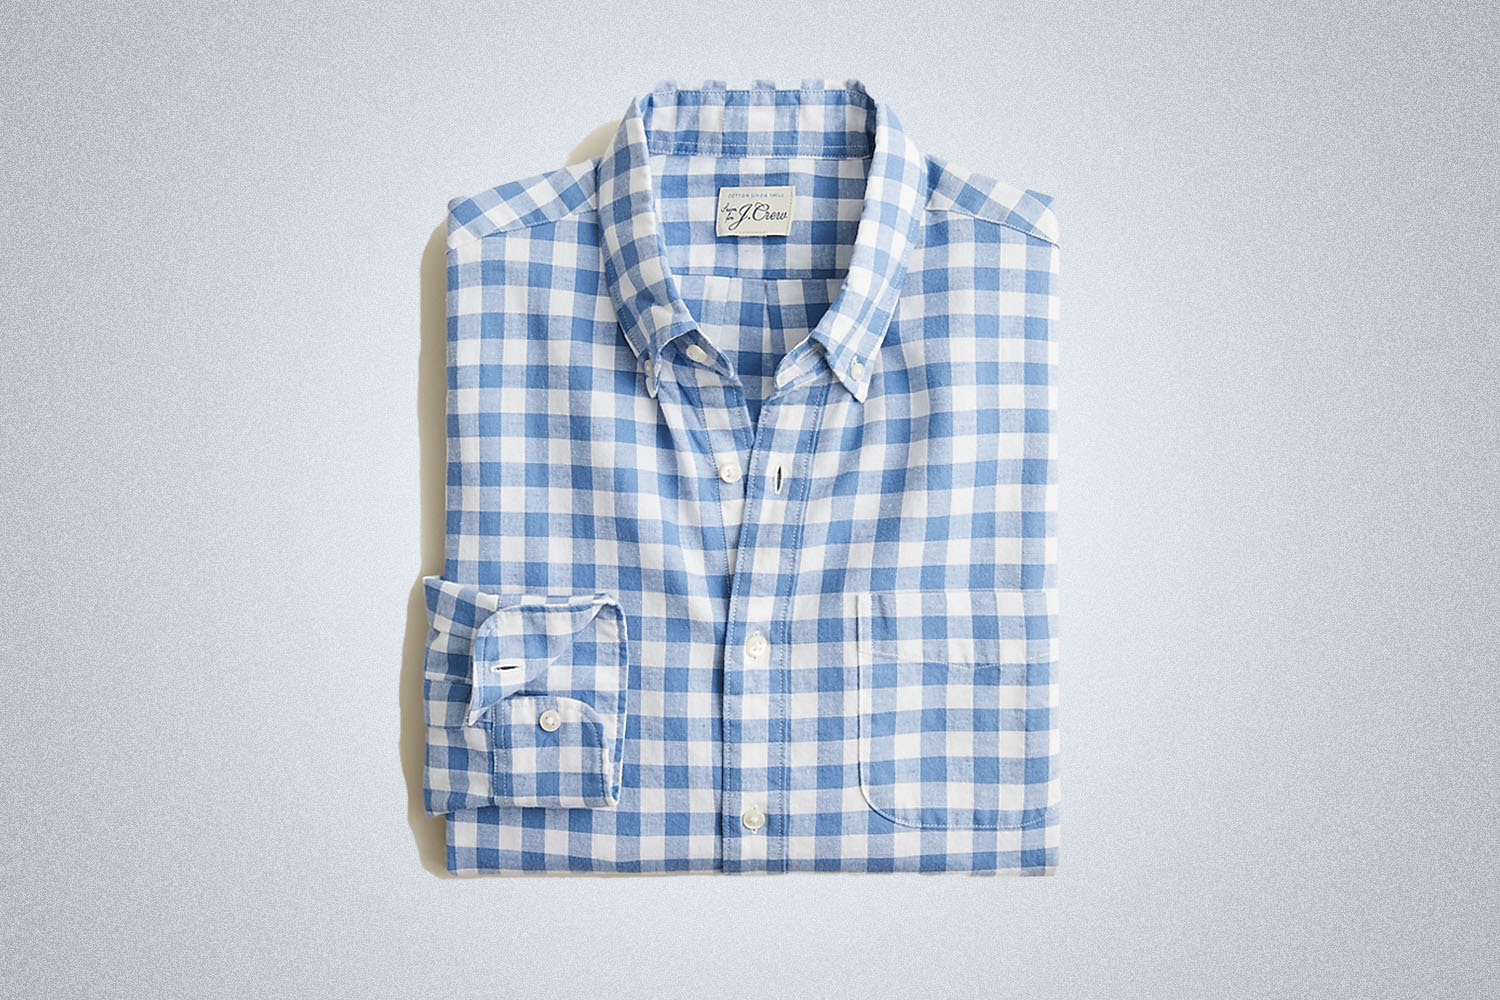 a checked blue and white shirt from J.Crew